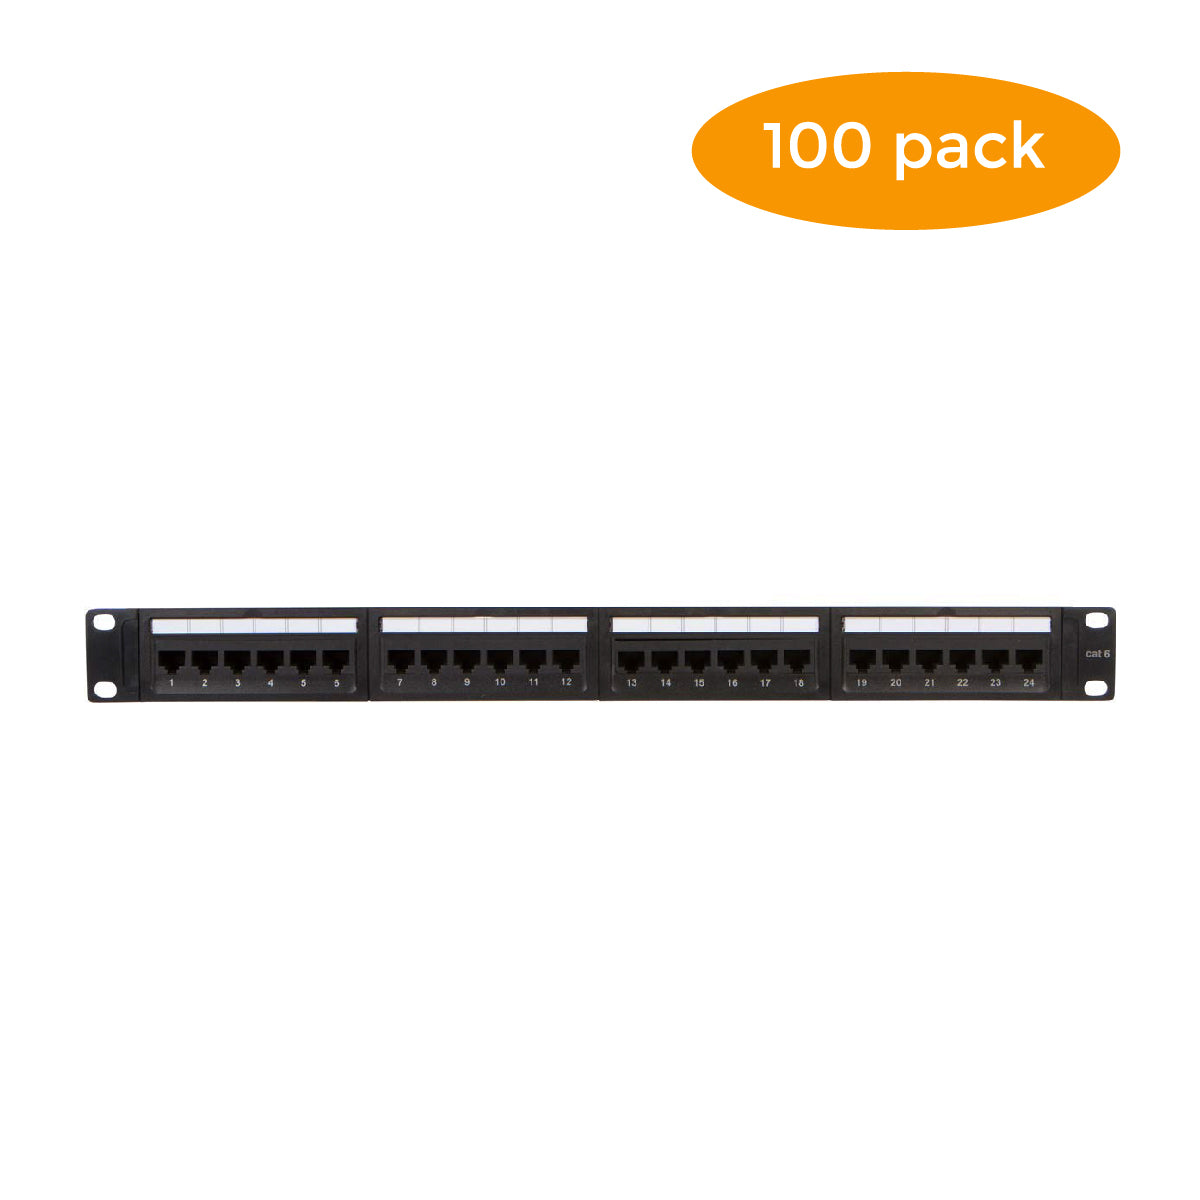 24 Port Cat6 Patch Panel with Punch Down Tool and Cable Management System (1, 24 Port) - Milena International Inc